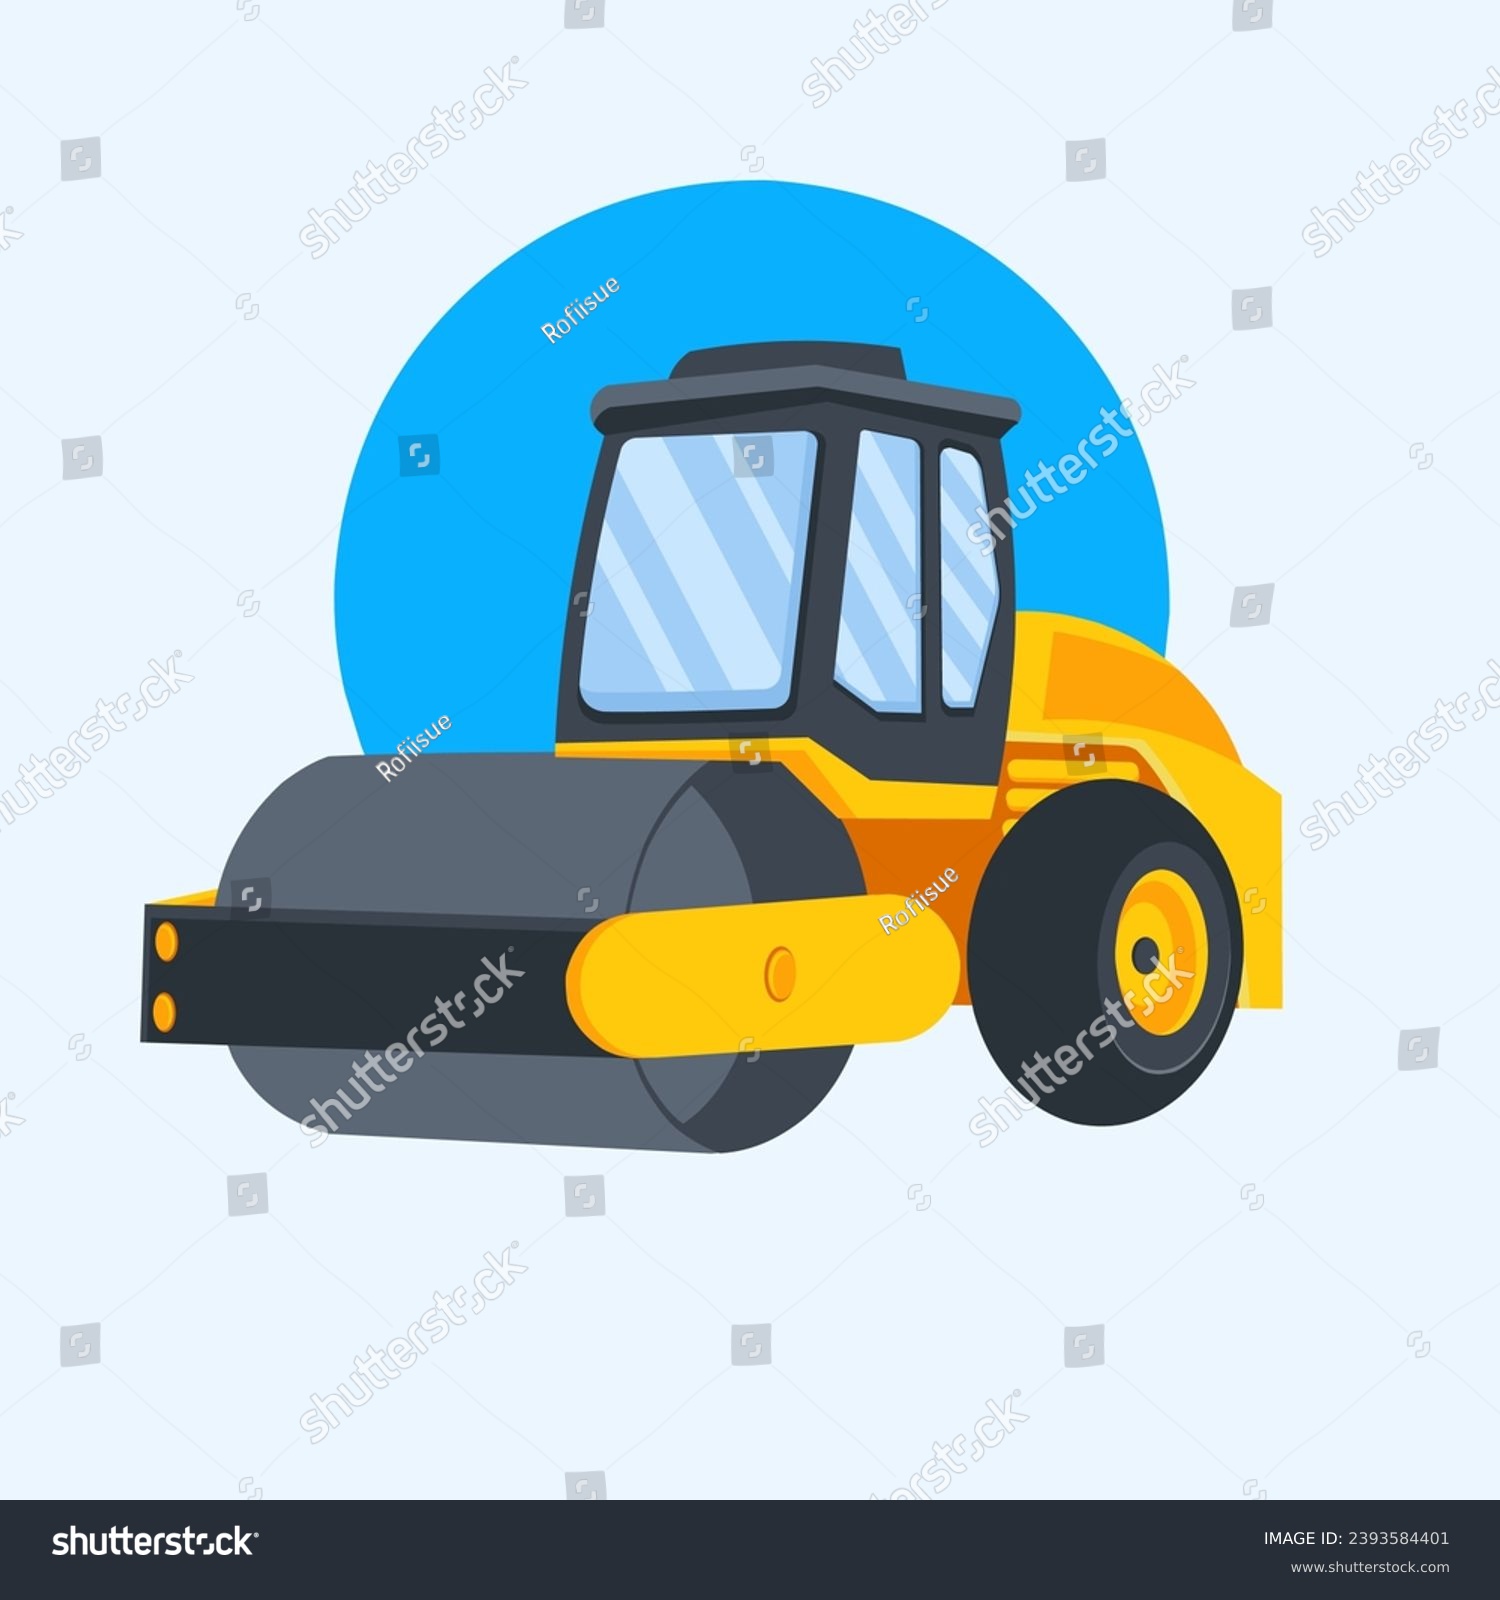 SVG of Asphalt Finisher, heavy equipment machine, for road construction, vector illustration suitable for education and children's coloring learning books svg